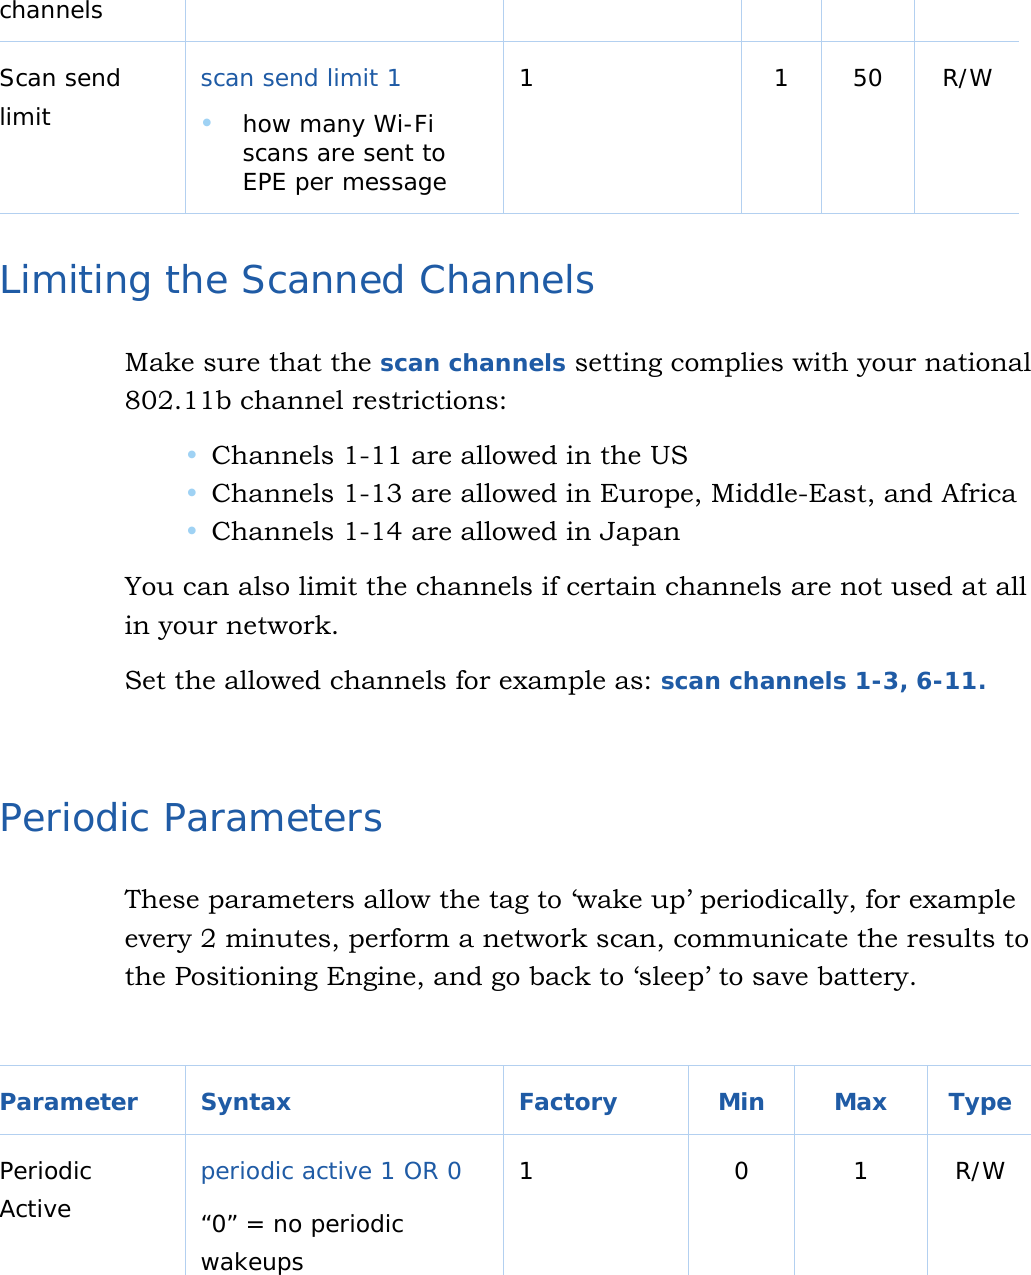   16 channels Scan send limit  scan send limit 1   how many Wi-Fi scans are sent to EPE per message 1 1 50 R/W  Limiting the Scanned Channels Make sure that the scan channels setting complies with your national 802.11b channel restrictions:   Channels 1-11 are allowed in the US  Channels 1-13 are allowed in Europe, Middle-East, and Africa  Channels 1-14 are allowed in Japan  You can also limit the channels if certain channels are not used at all in your network. Set the allowed channels for example as: scan channels 1-3, 6-11.   Periodic Parameters These parameters allow the tag to ‘wake up’ periodically, for example every 2 minutes, perform a network scan, communicate the results to the Positioning Engine, and go back to ‘sleep’ to save battery.  Parameter Syntax  Factory  Min  Max Type Periodic Active  periodic active 1 OR 0 “0” = no periodic wakeups 1 0 1 R/W  